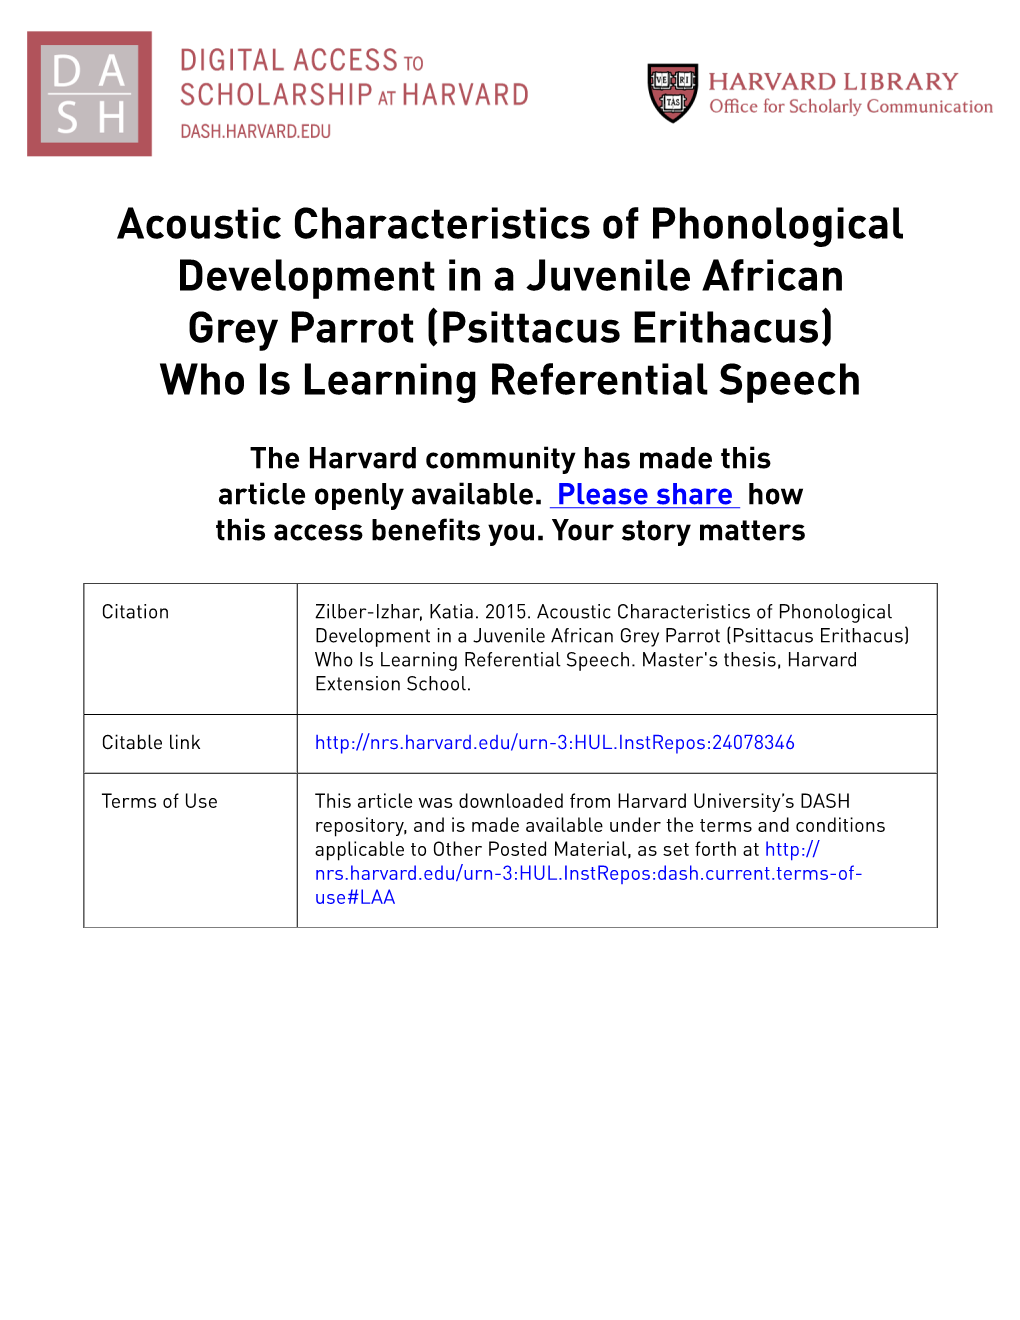 Acoustic Characteristics of Phonological Development in a Juvenile African Grey Parrot (Psittacus Erithacus) Who Is Learning Referential Speech